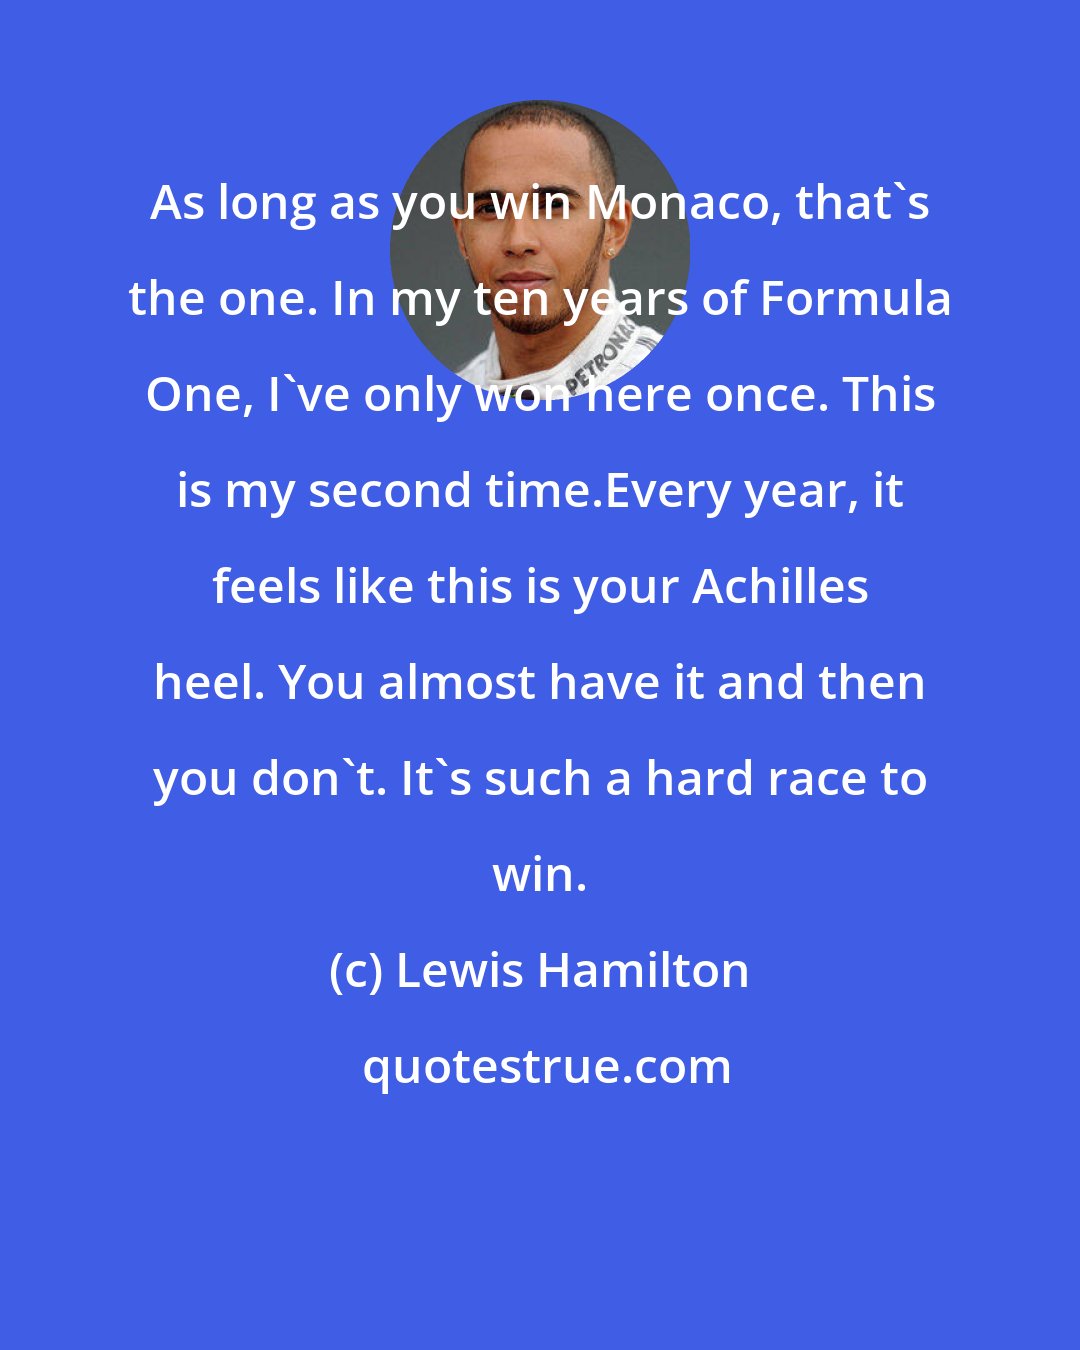 Lewis Hamilton: As long as you win Monaco, that's the one. In my ten years of Formula One, I've only won here once. This is my second time.Every year, it feels like this is your Achilles heel. You almost have it and then you don't. It's such a hard race to win.